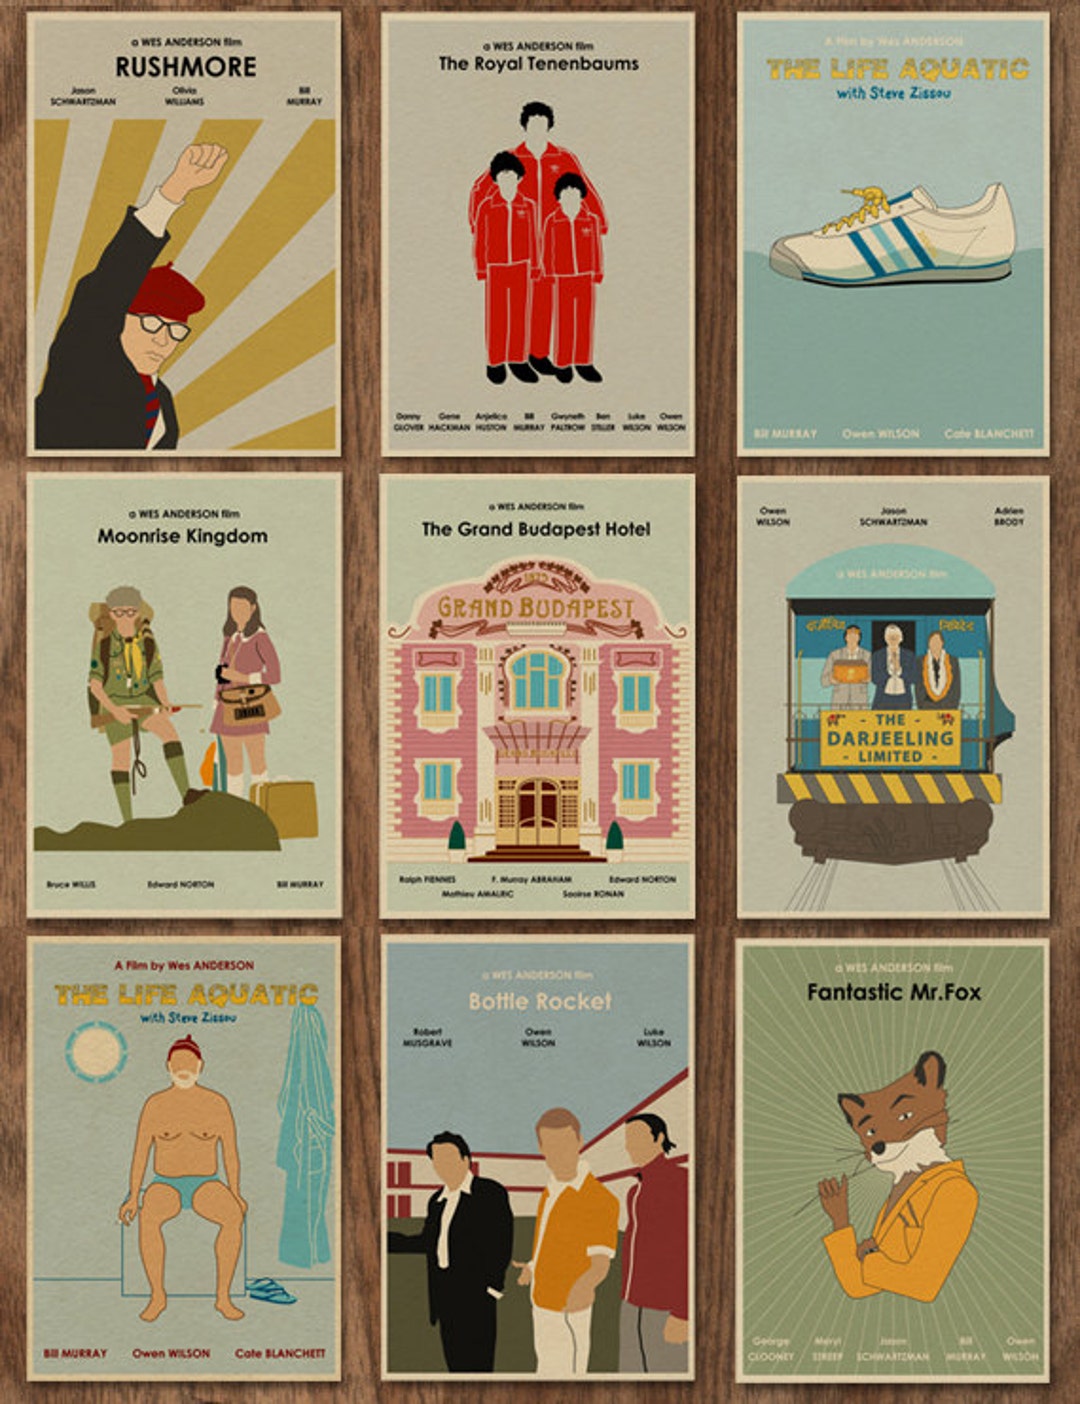 The Darjeeling Limited 16x12 Wes Anderson Movie Poster Print 